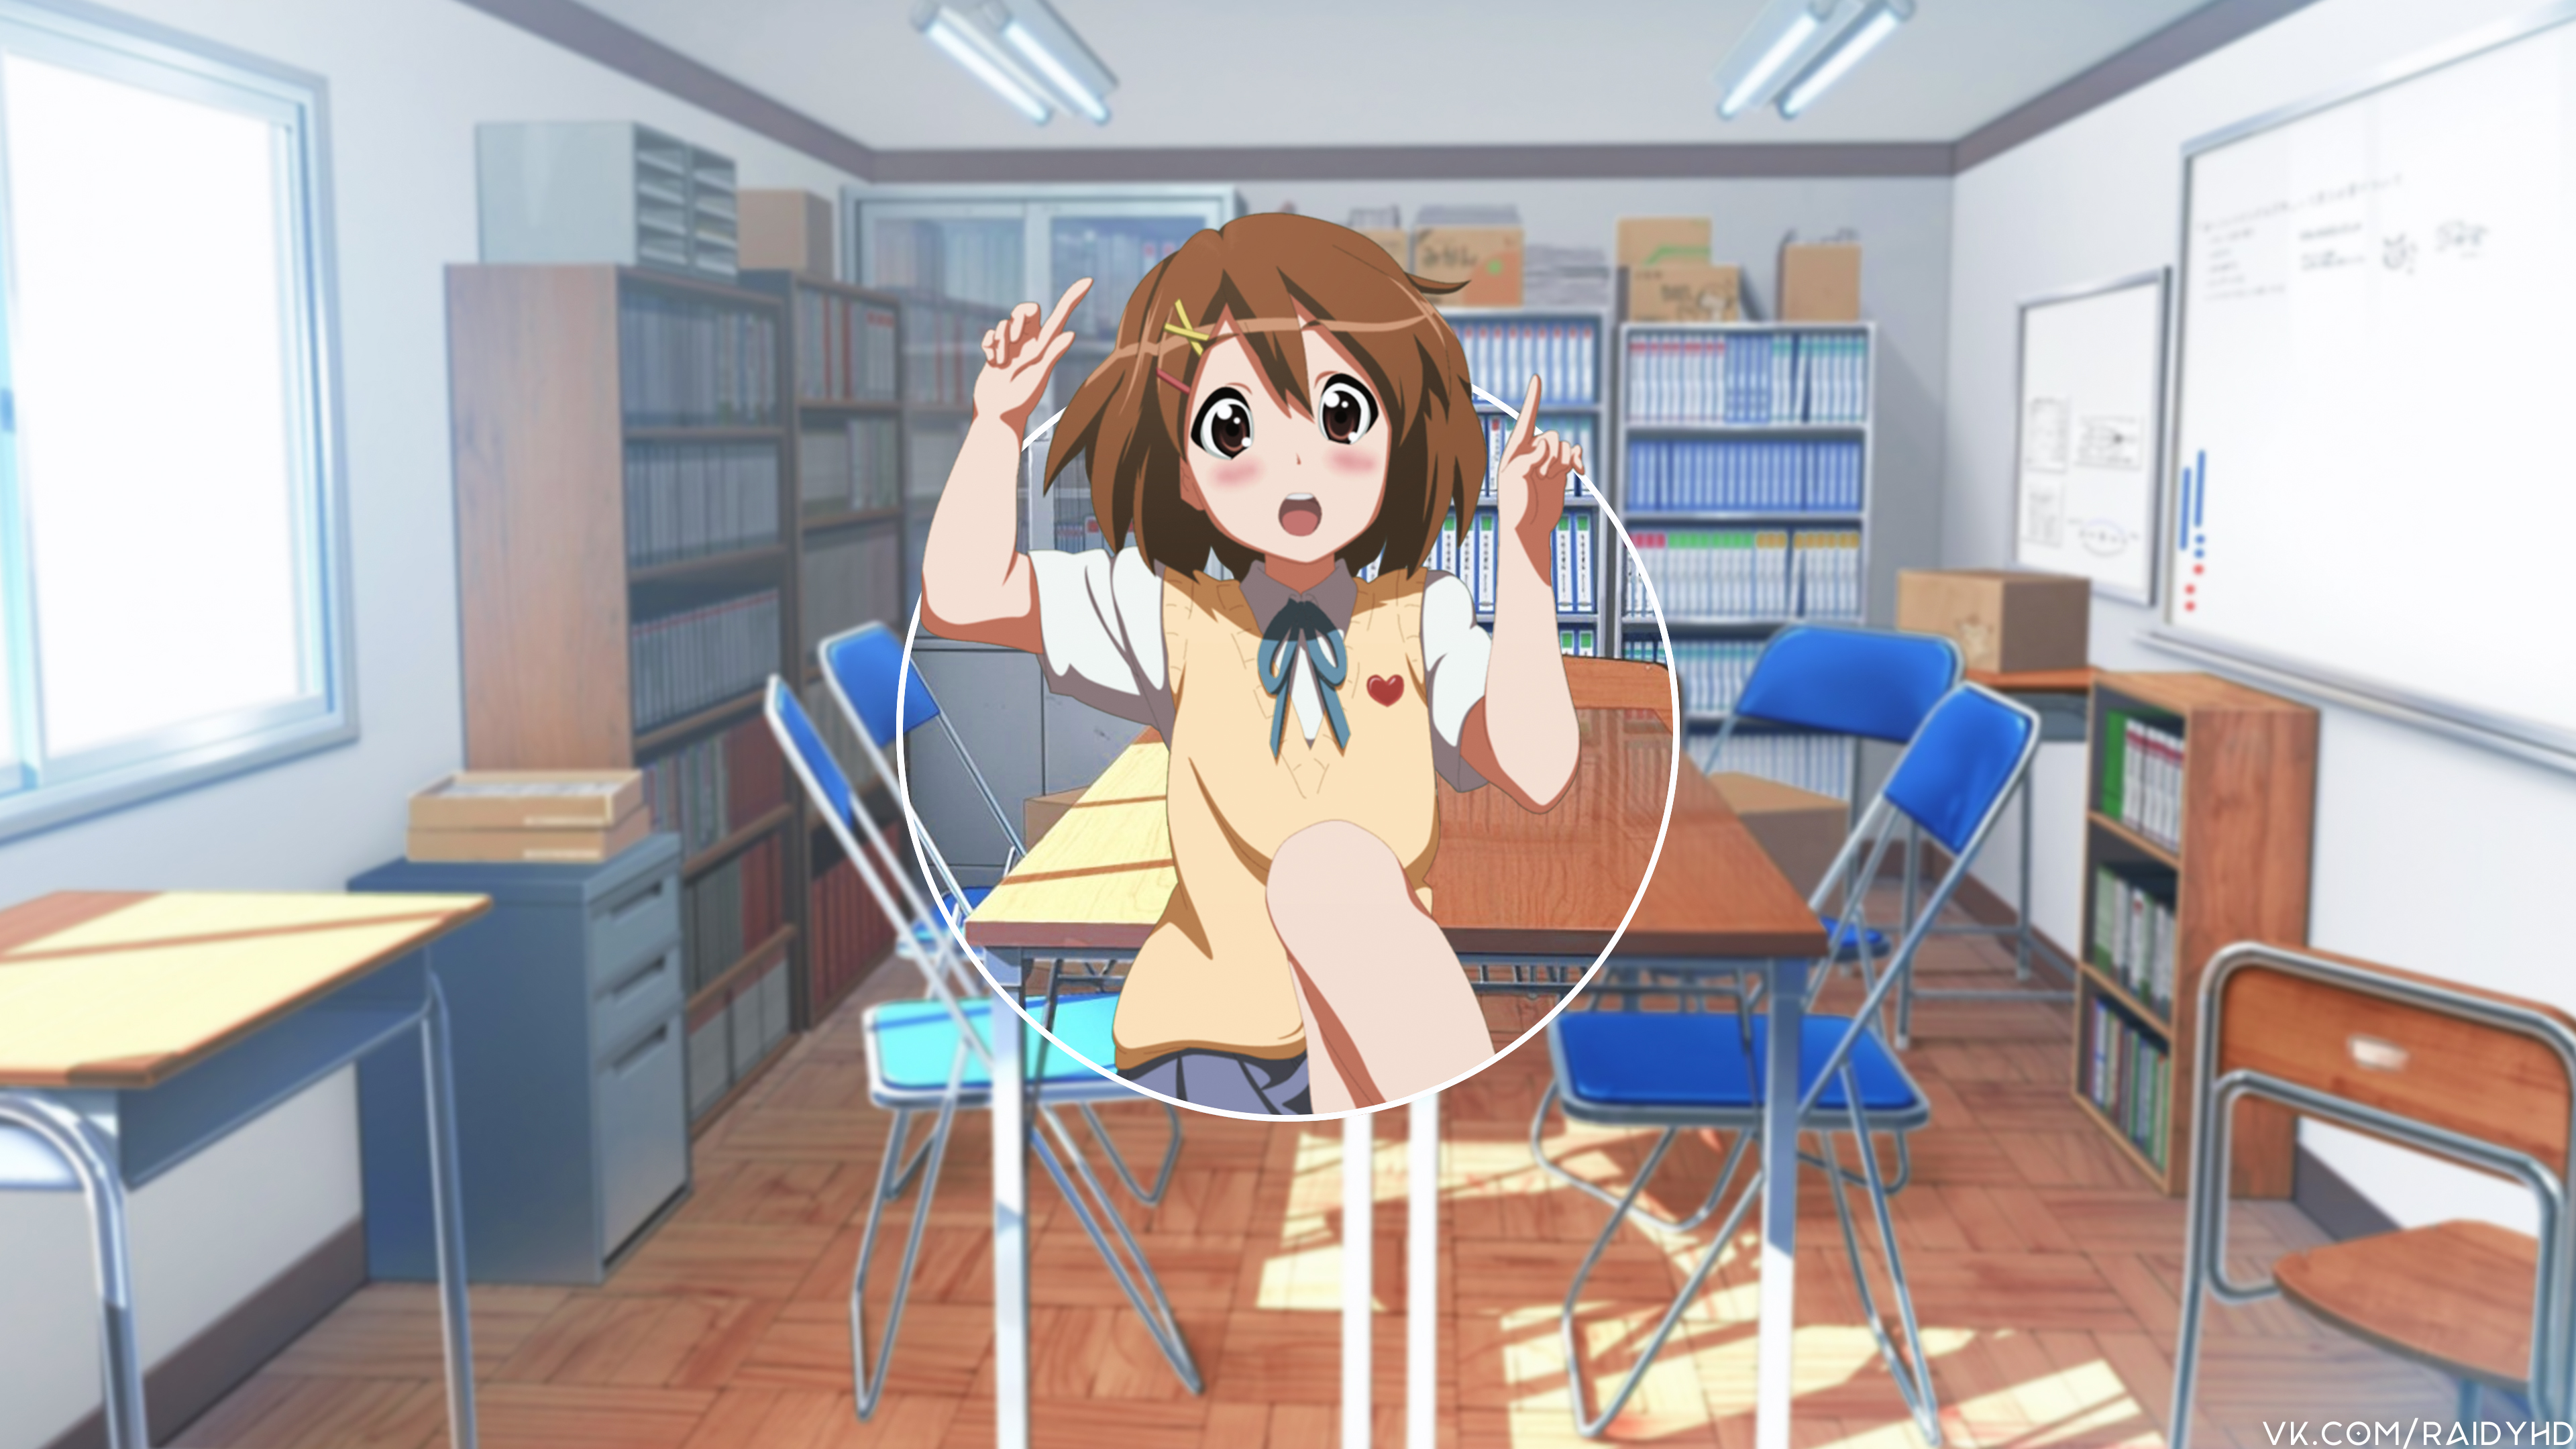 Anime 3840x2160 anime anime girls picture-in-picture Hirasawa Yui K-ON!